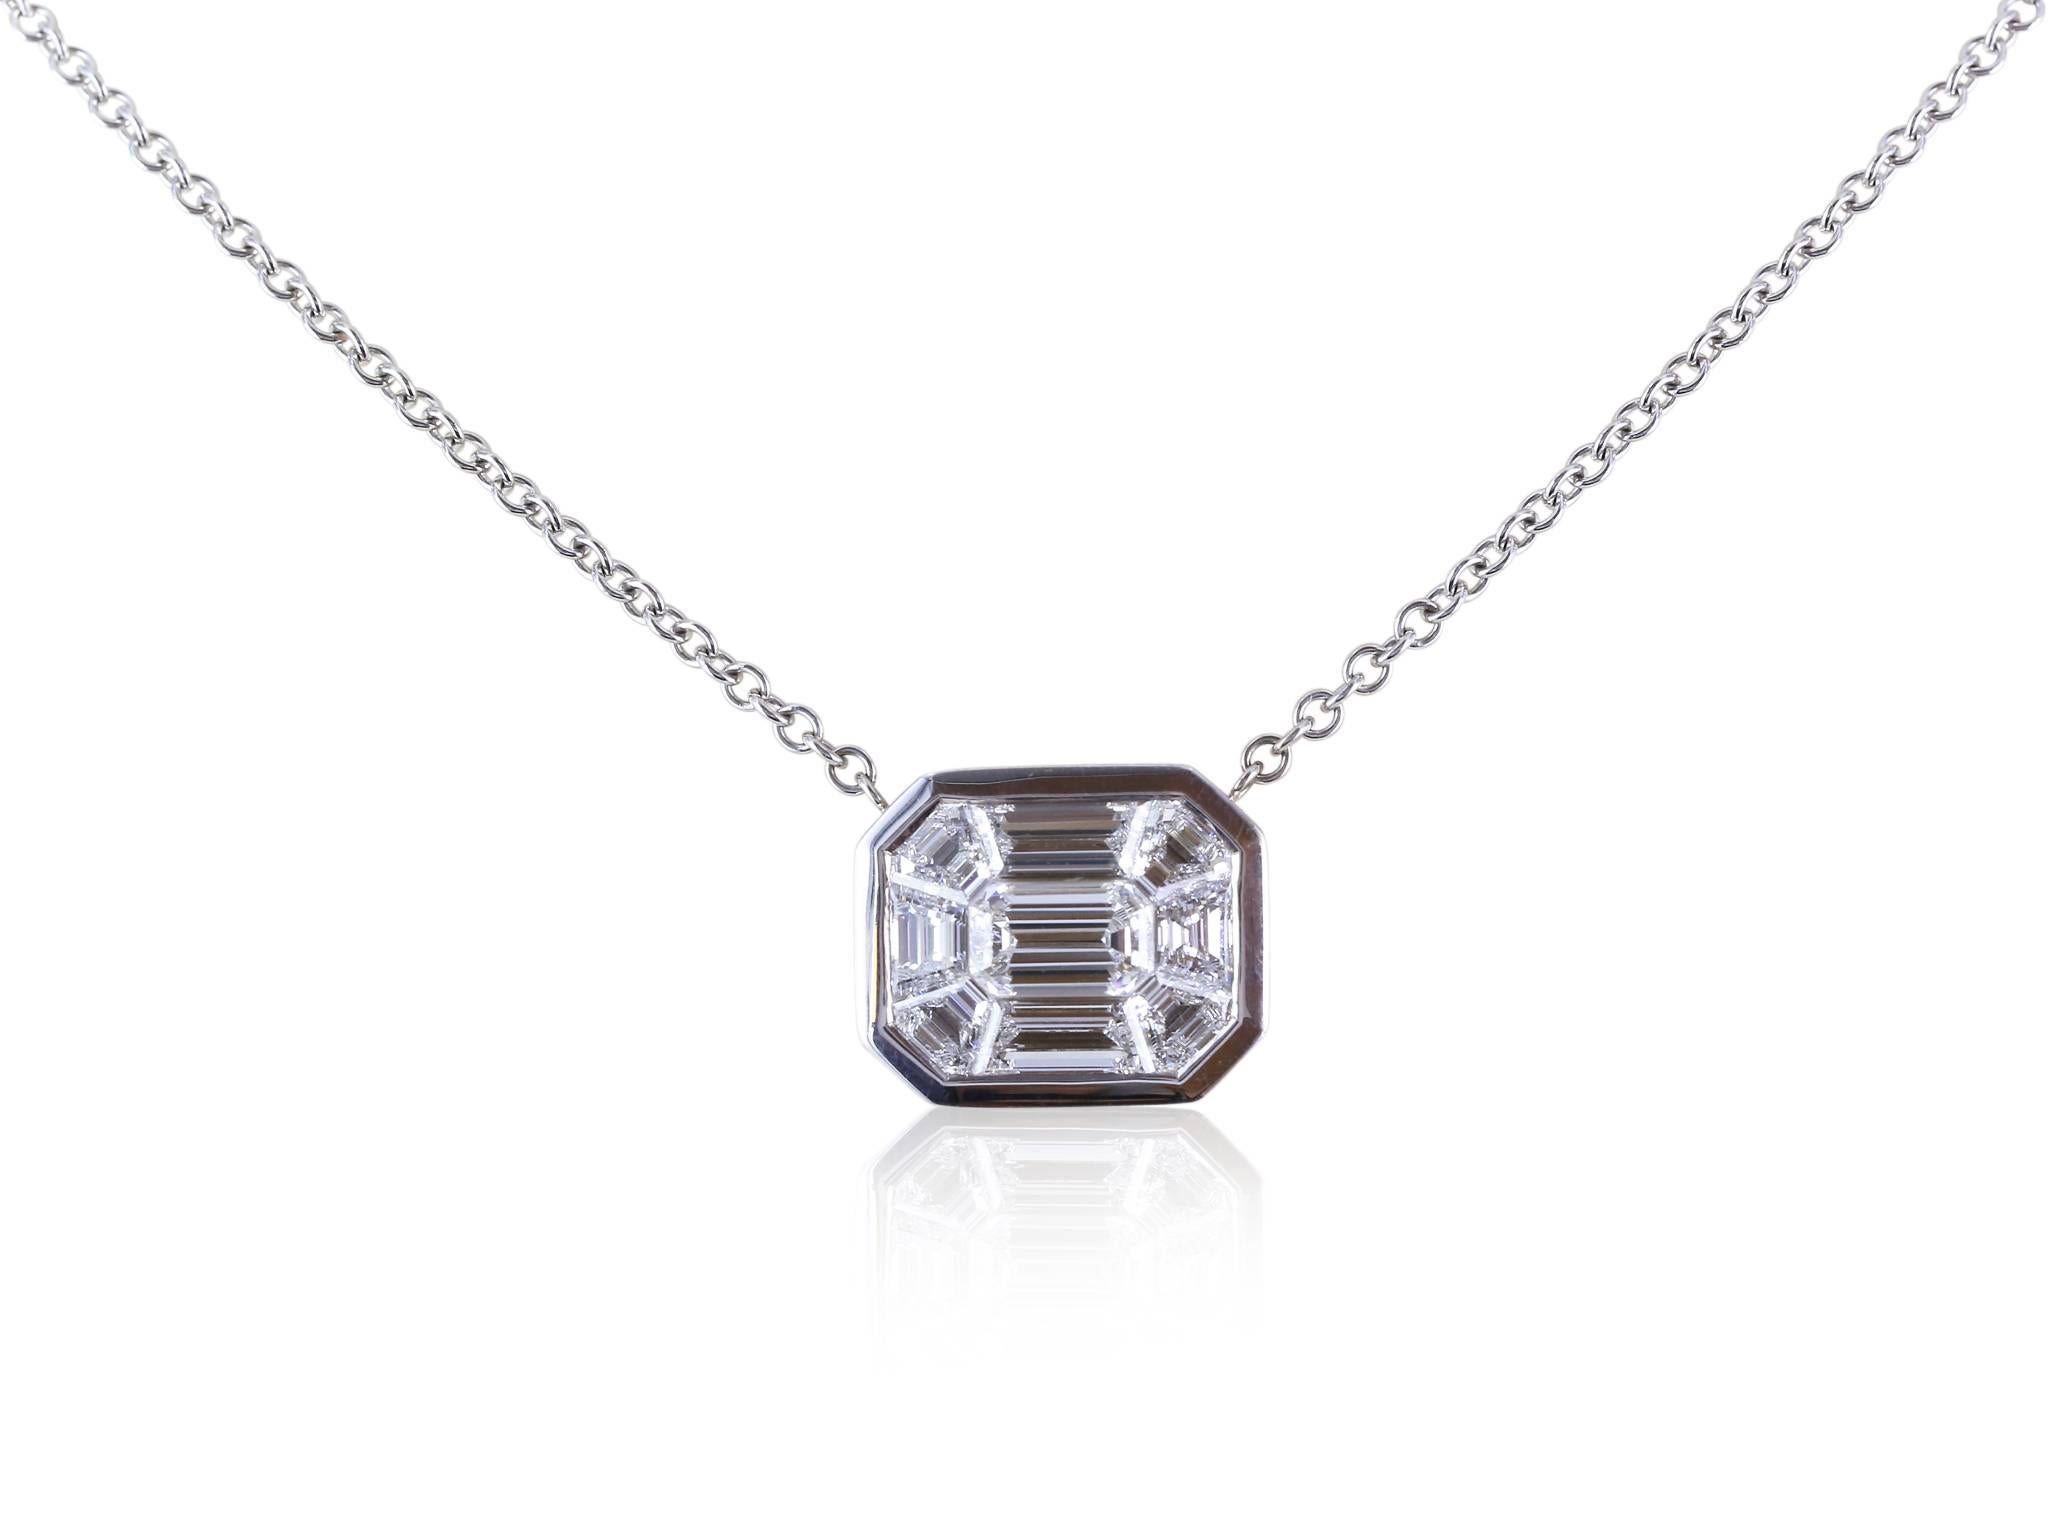 18 Karat white gold diamond pendant containing 9 diamonds of varying shapes combined to make a total weight of . All of the diamonds have a color of G/H and a clarity of VVS.  The pendant is on an 18 inch 18 karat white gold cable chain.